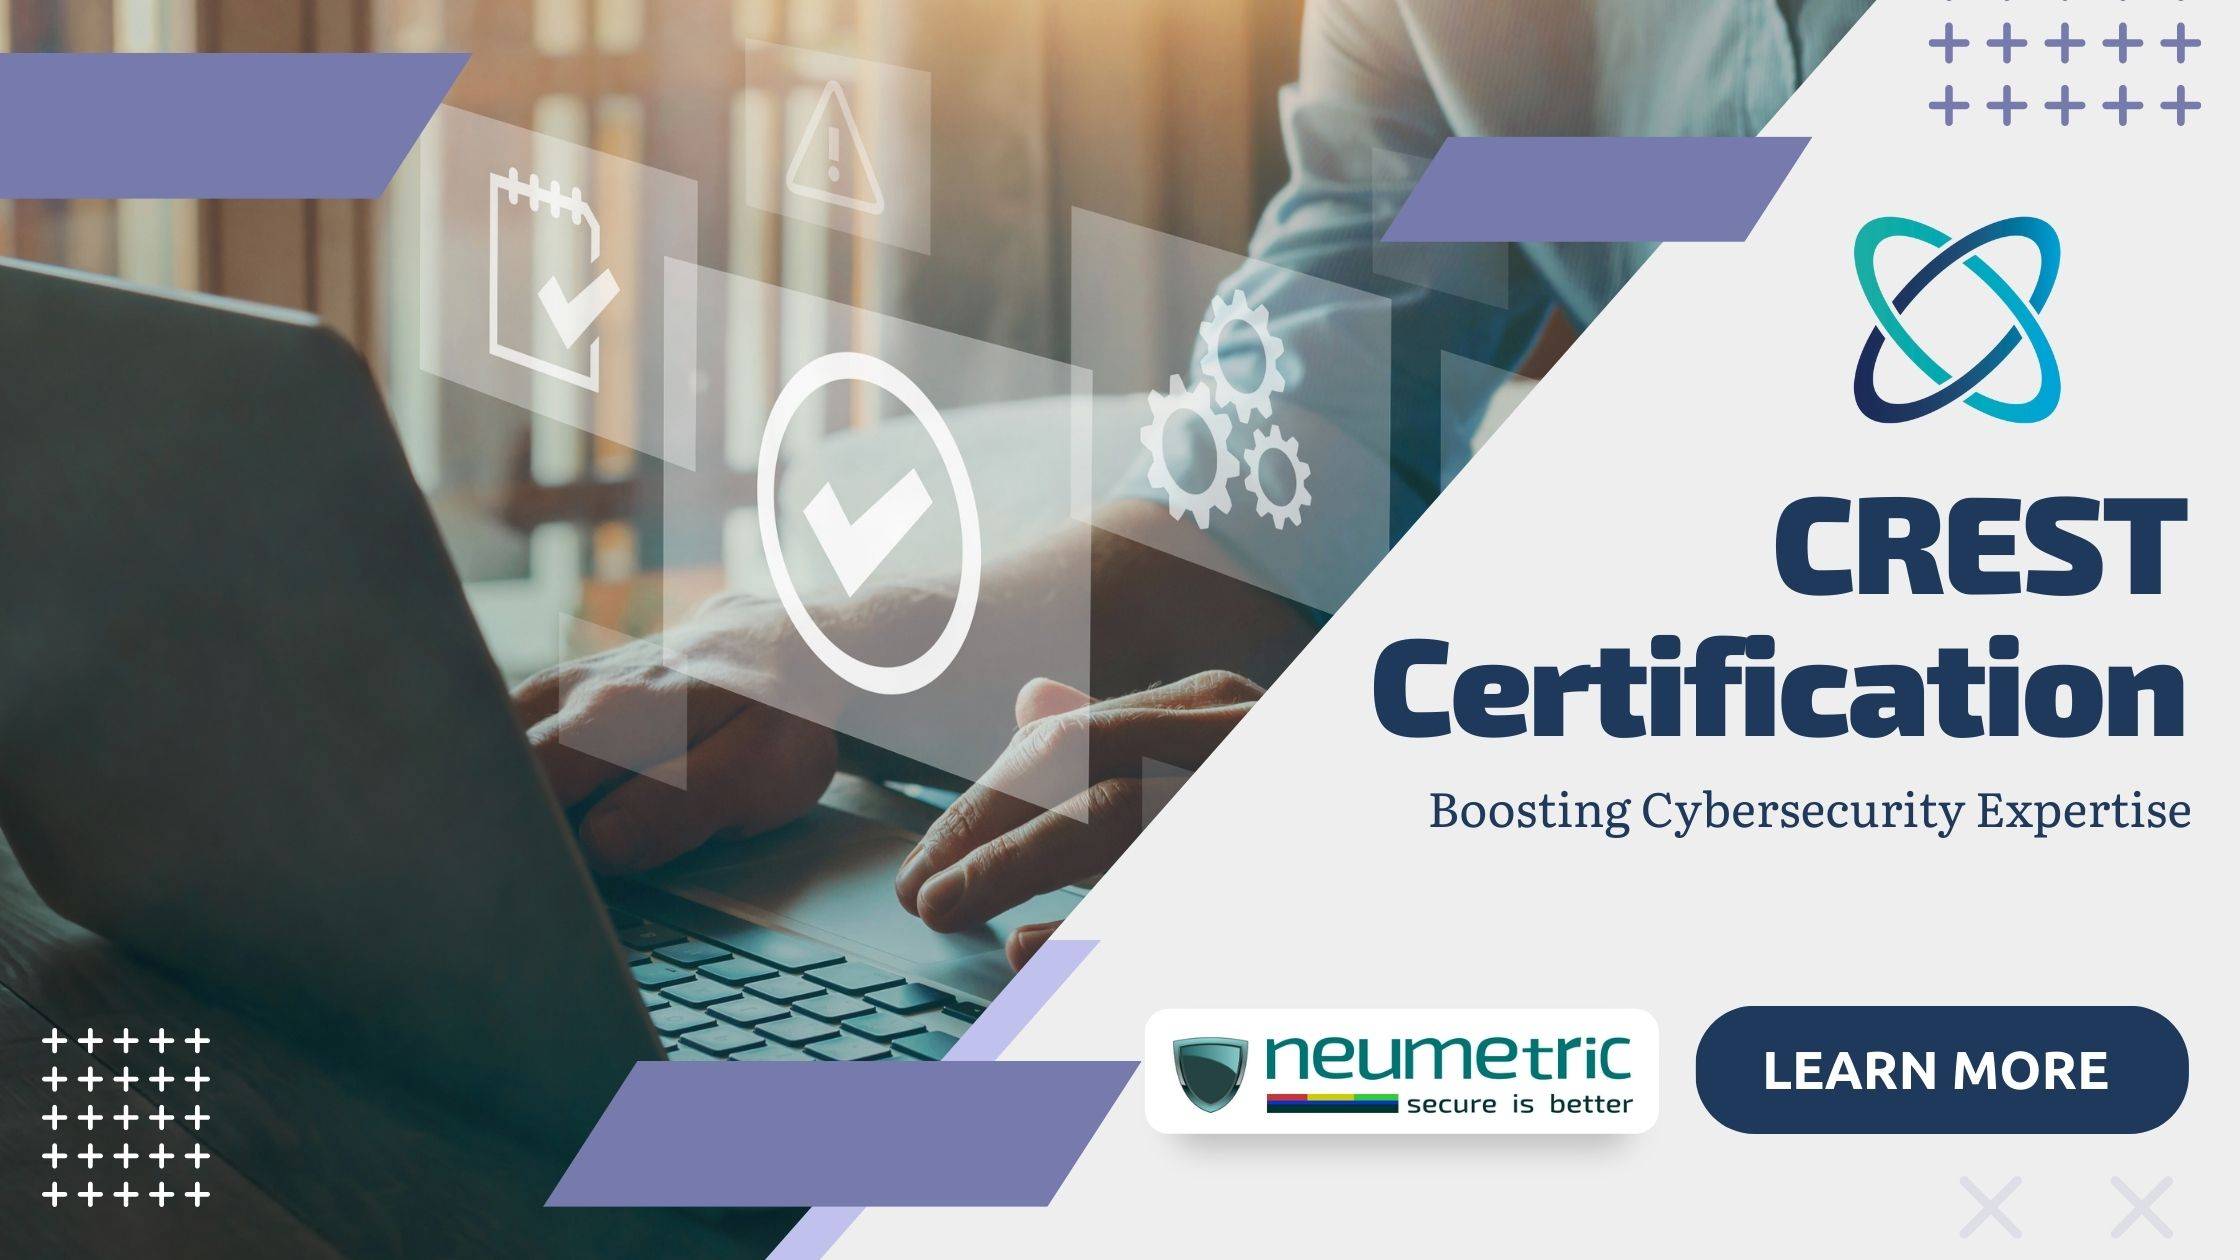 CREST Certification: Boosting Cybersecurity Expertise